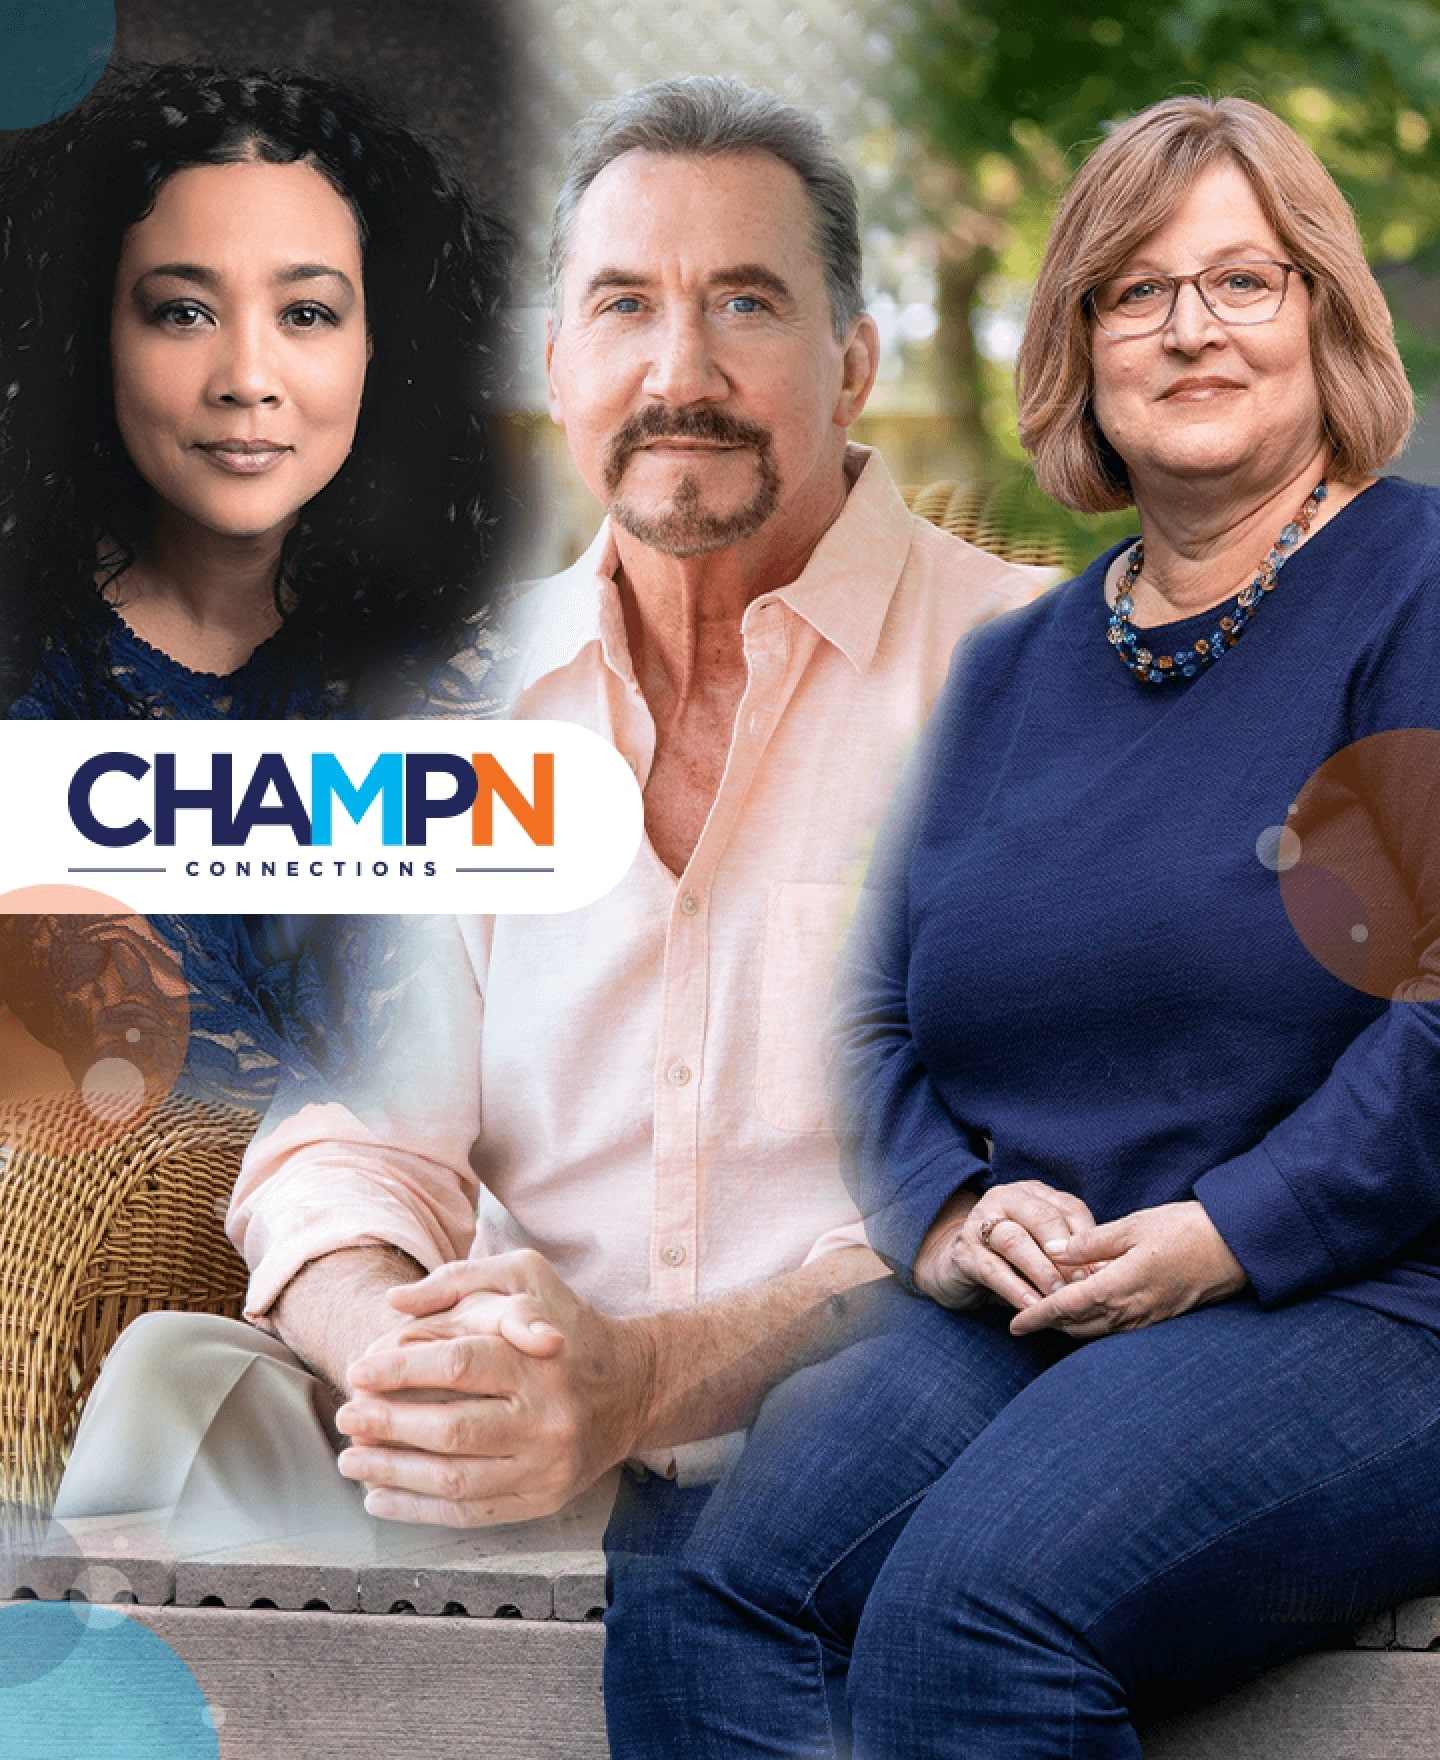 Meet 3 MPN Peers from CHAMPN Connections